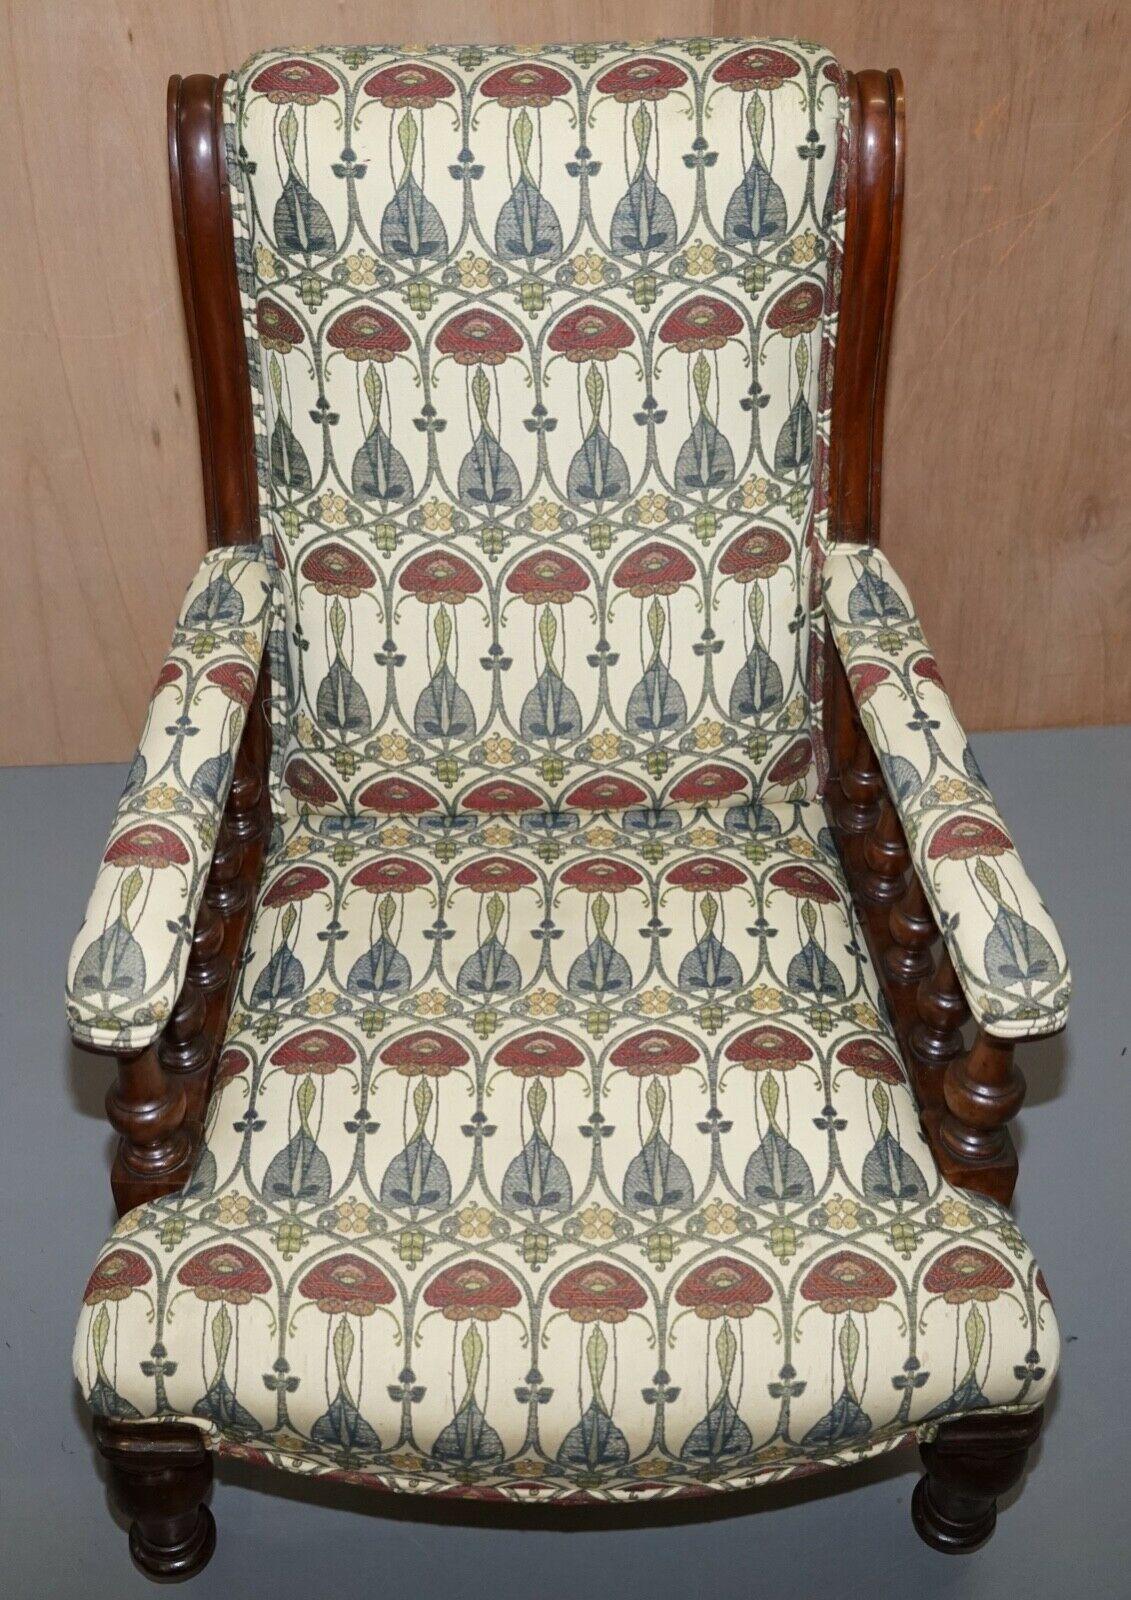 20th Century RT Deco Berger Armchair Art Nouveau Upholstery by Charles Rennie Mackintosh